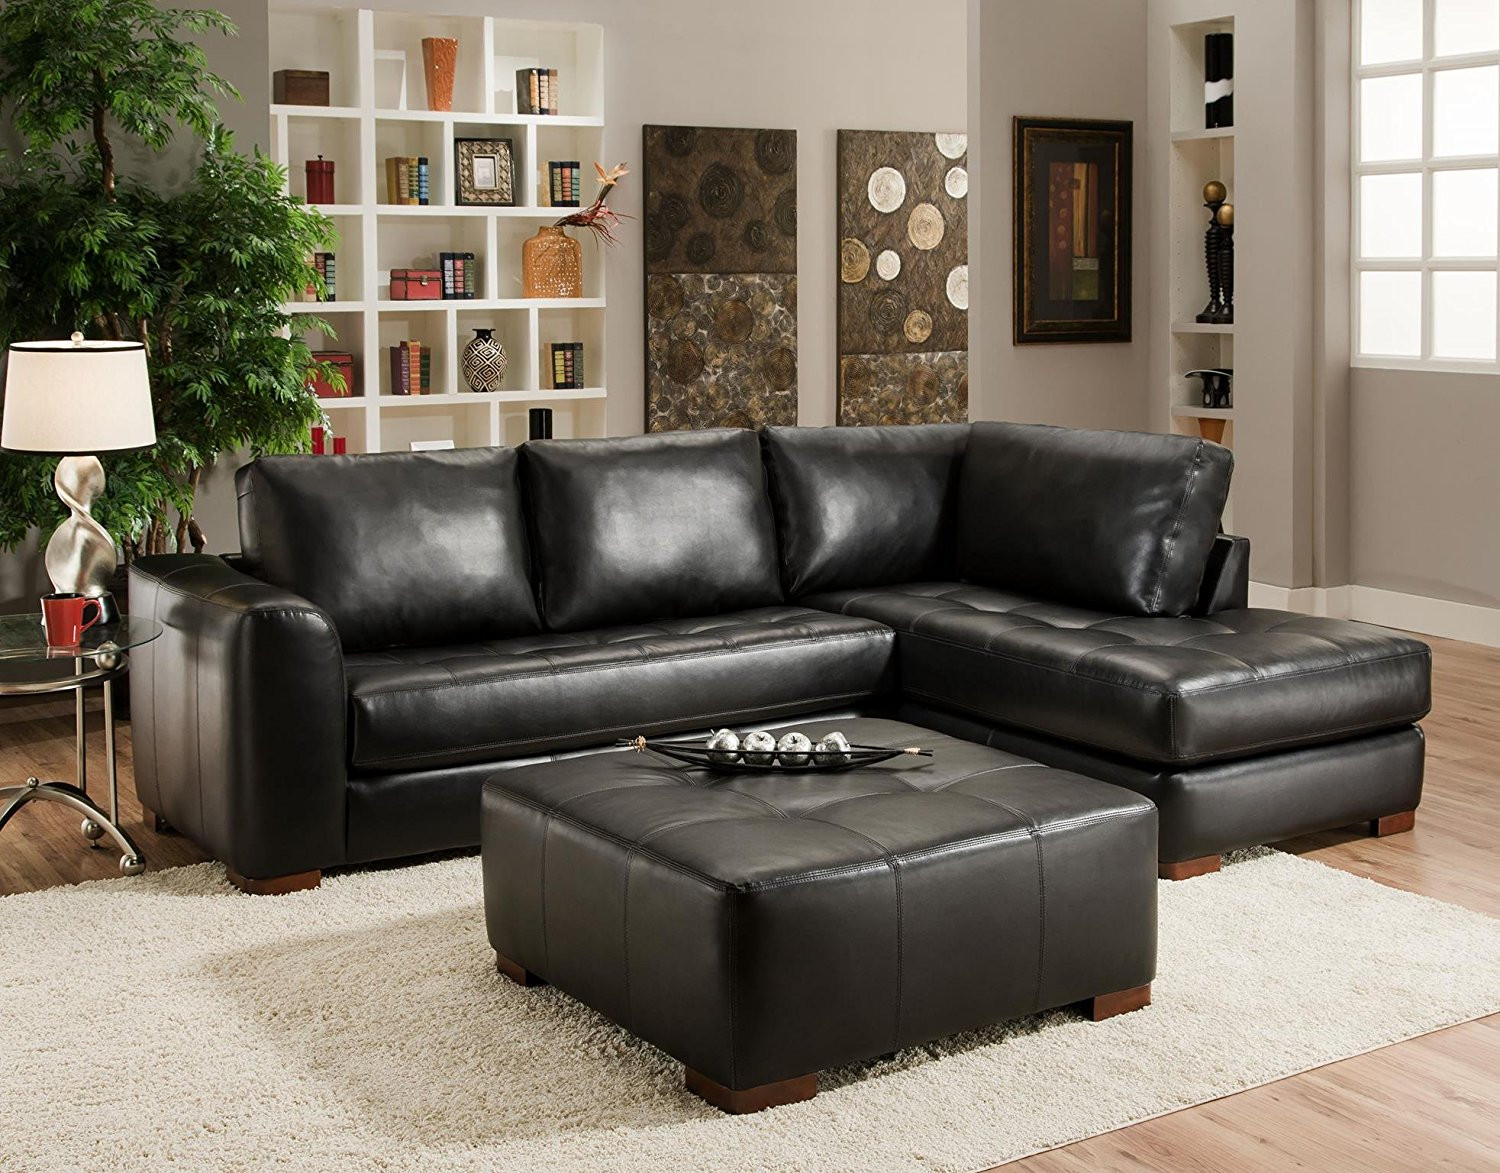 Sectional For Small Living Room
 Living Room Small Sectional Sofa For Living Room And